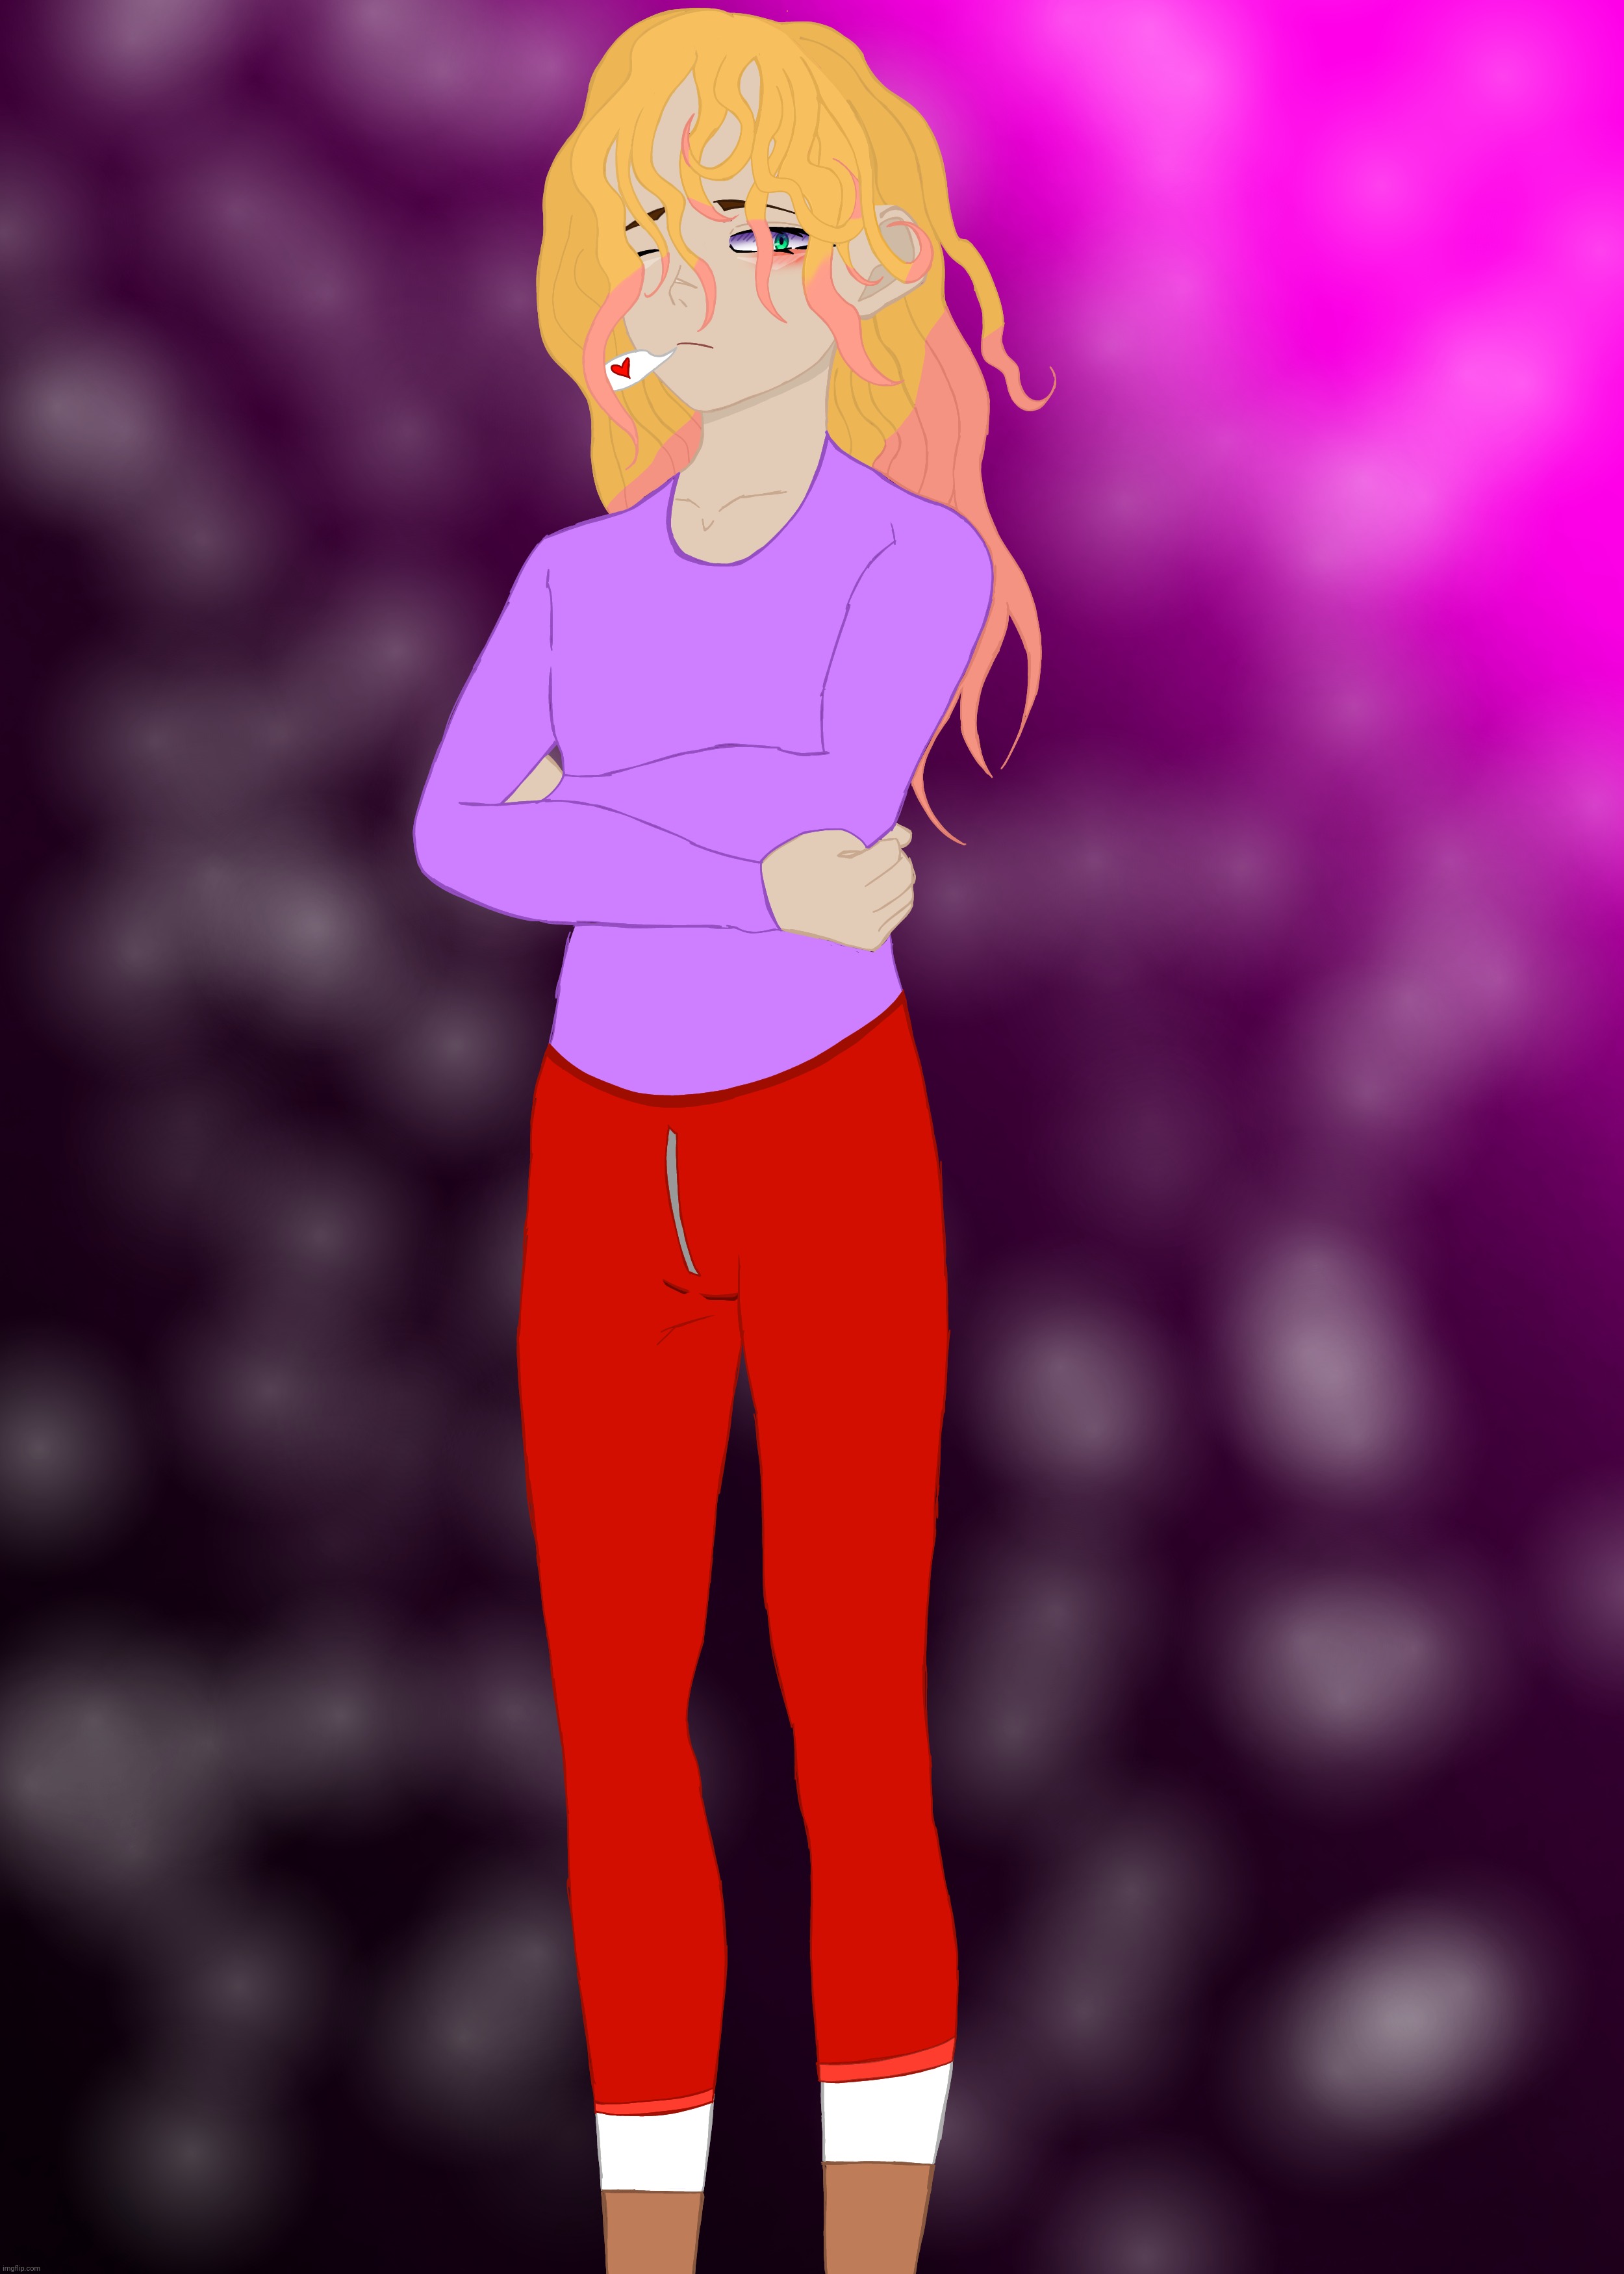 Drew my sister. Time: 2½ hours. | made w/ Imgflip meme maker